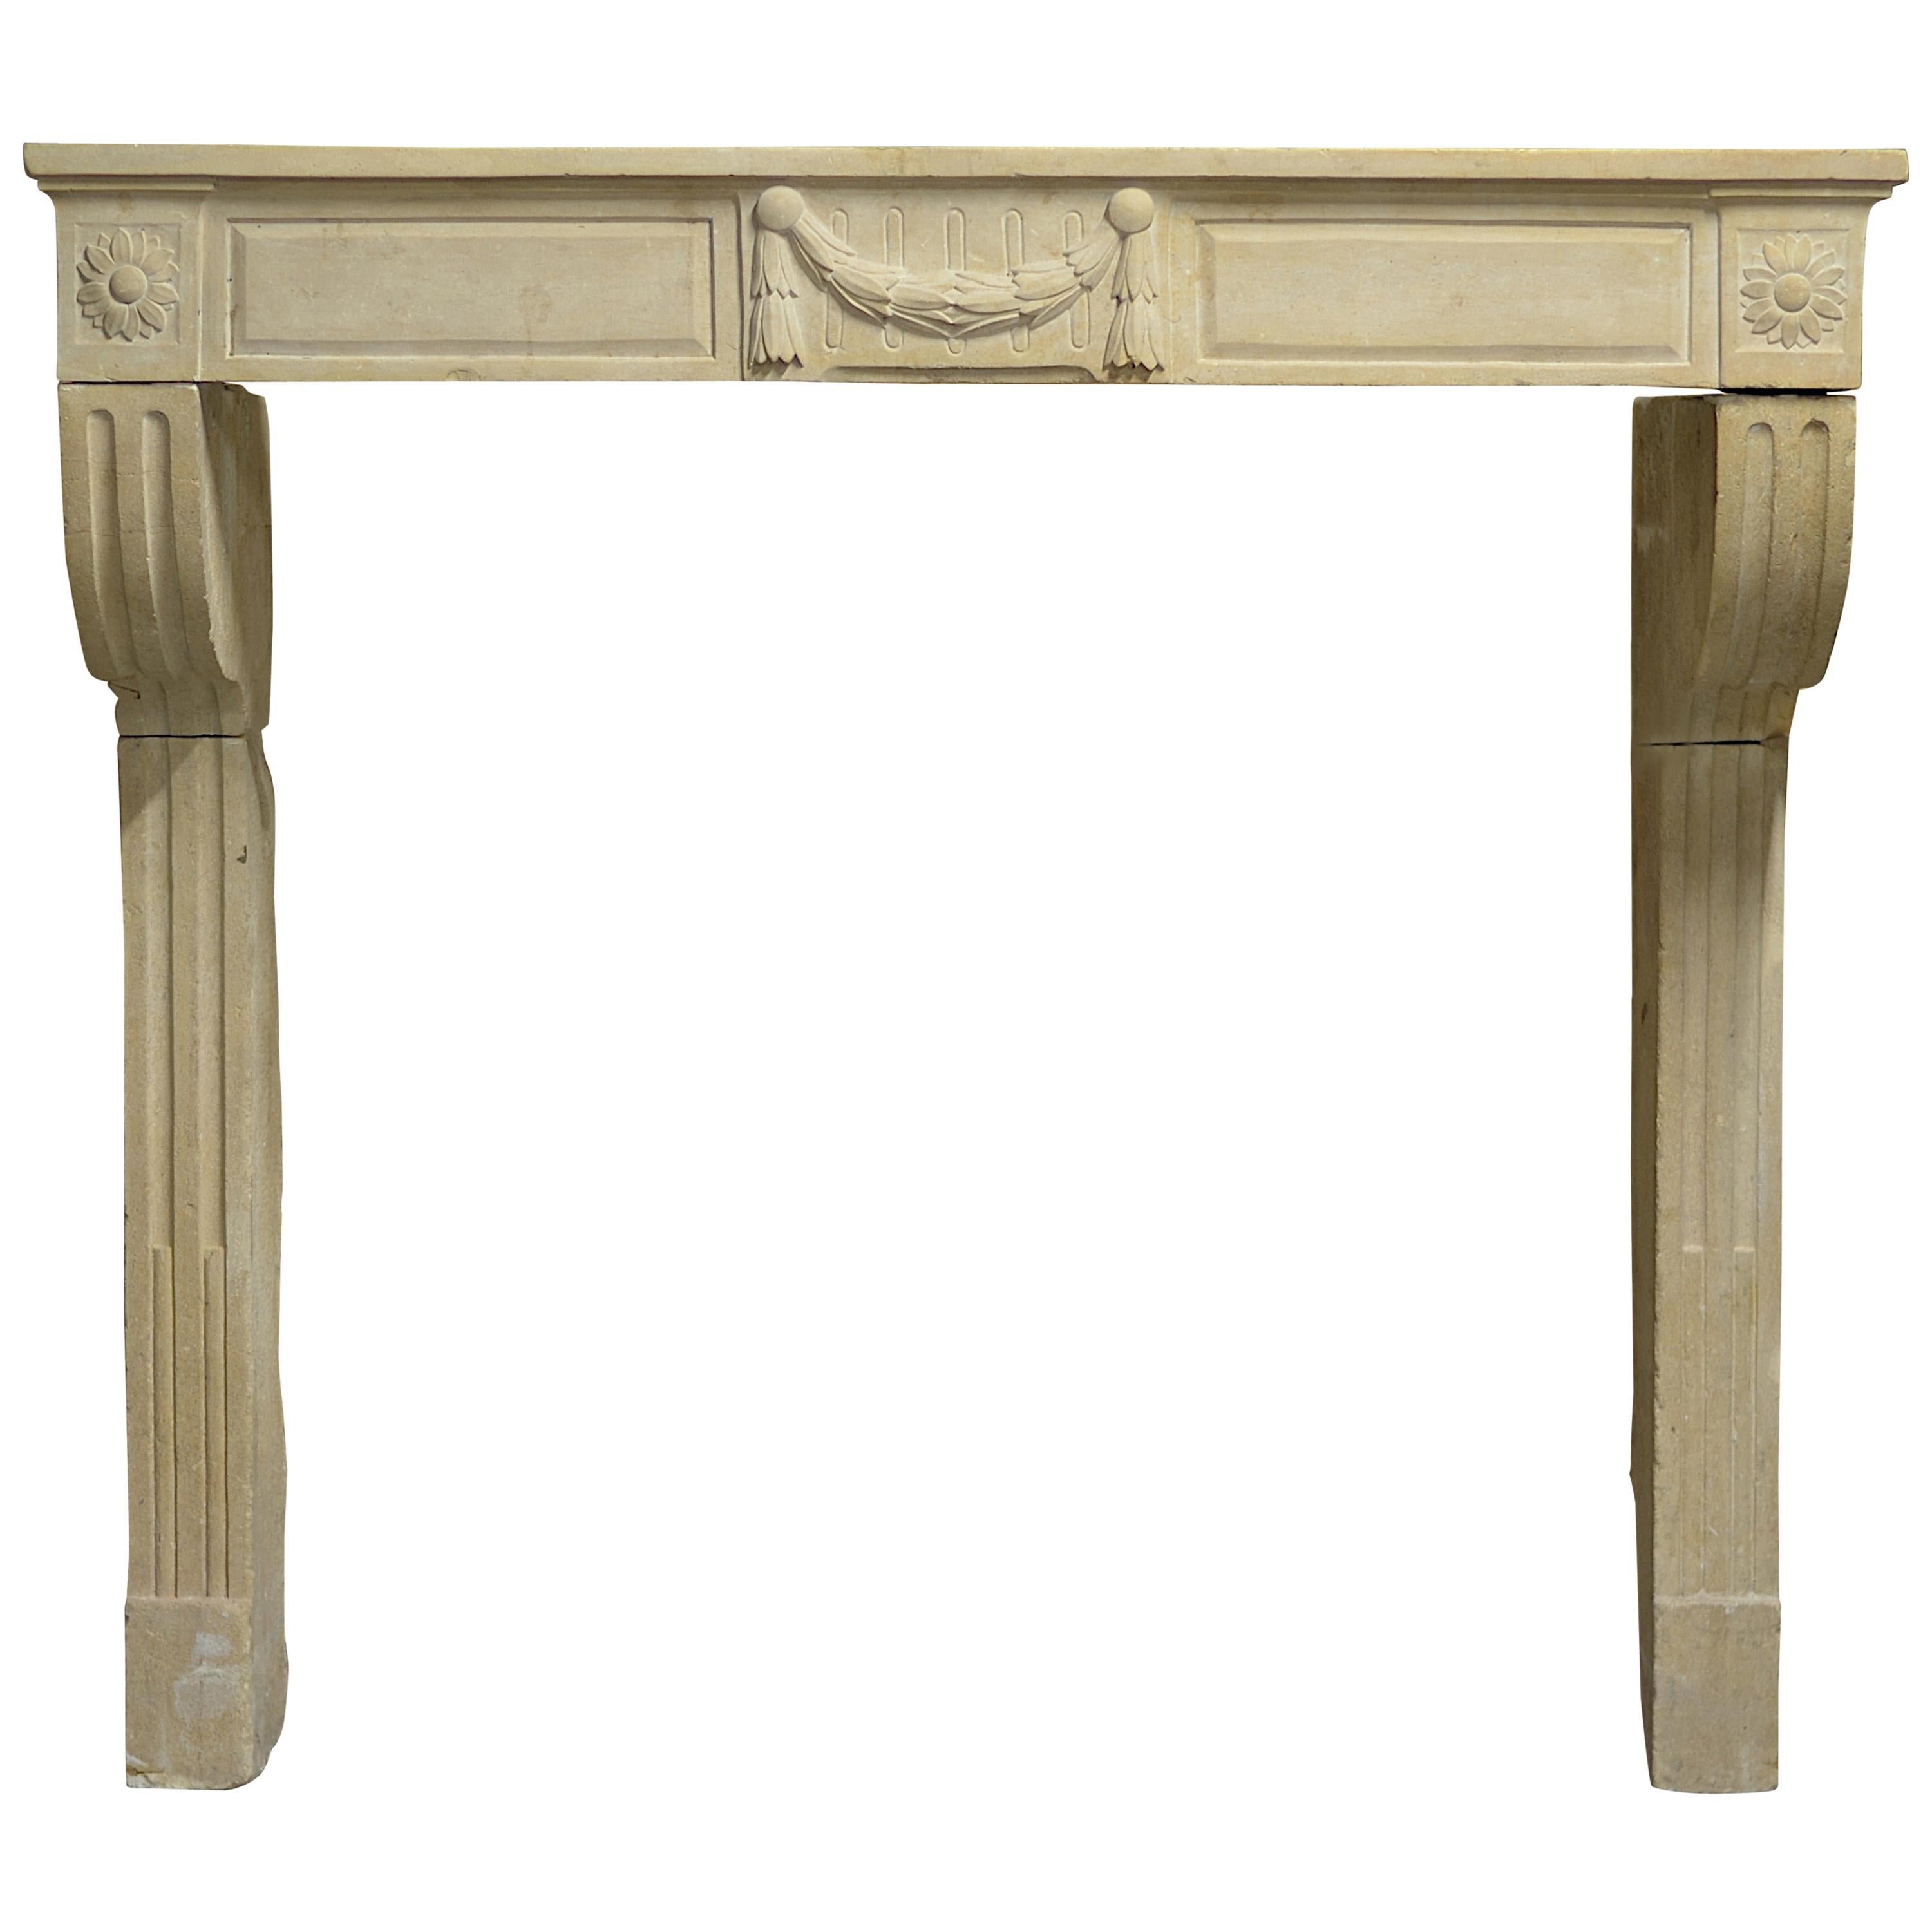 Perfect Antique French Louis XVI Fireplace Mantel